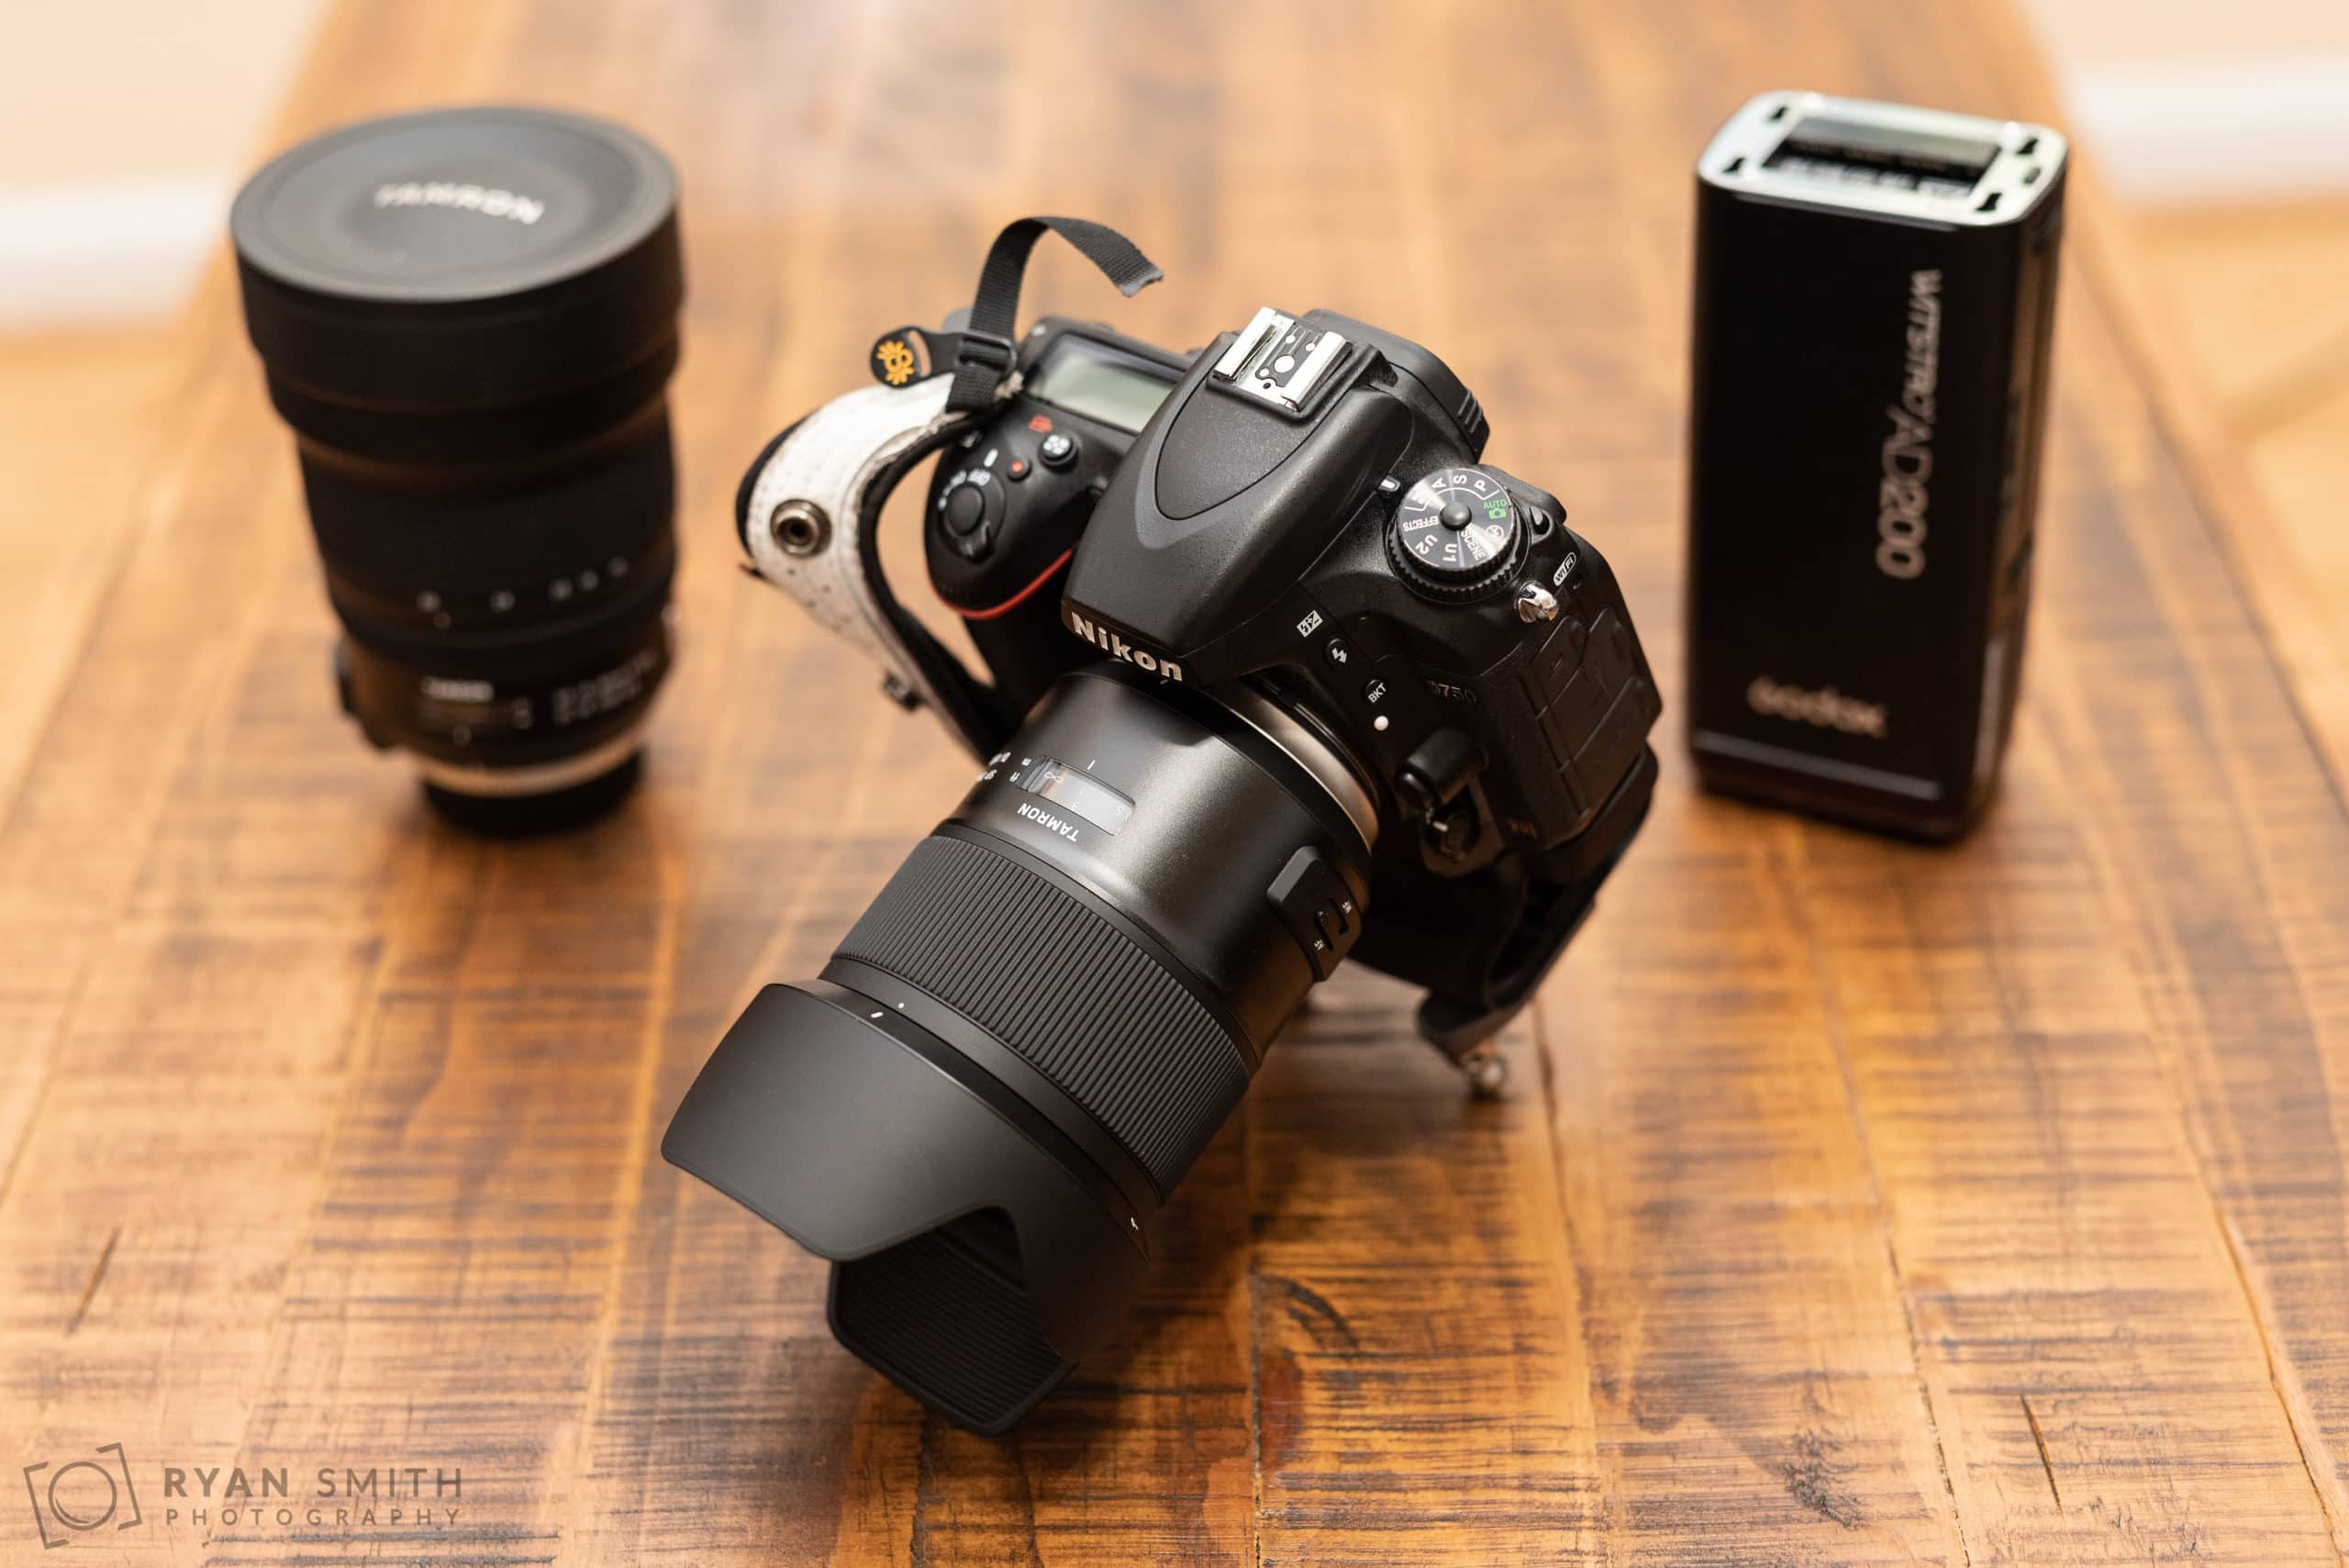 Wedding review of the new Tamron SP 35mm F/1.4 Di USD Nikon Lens